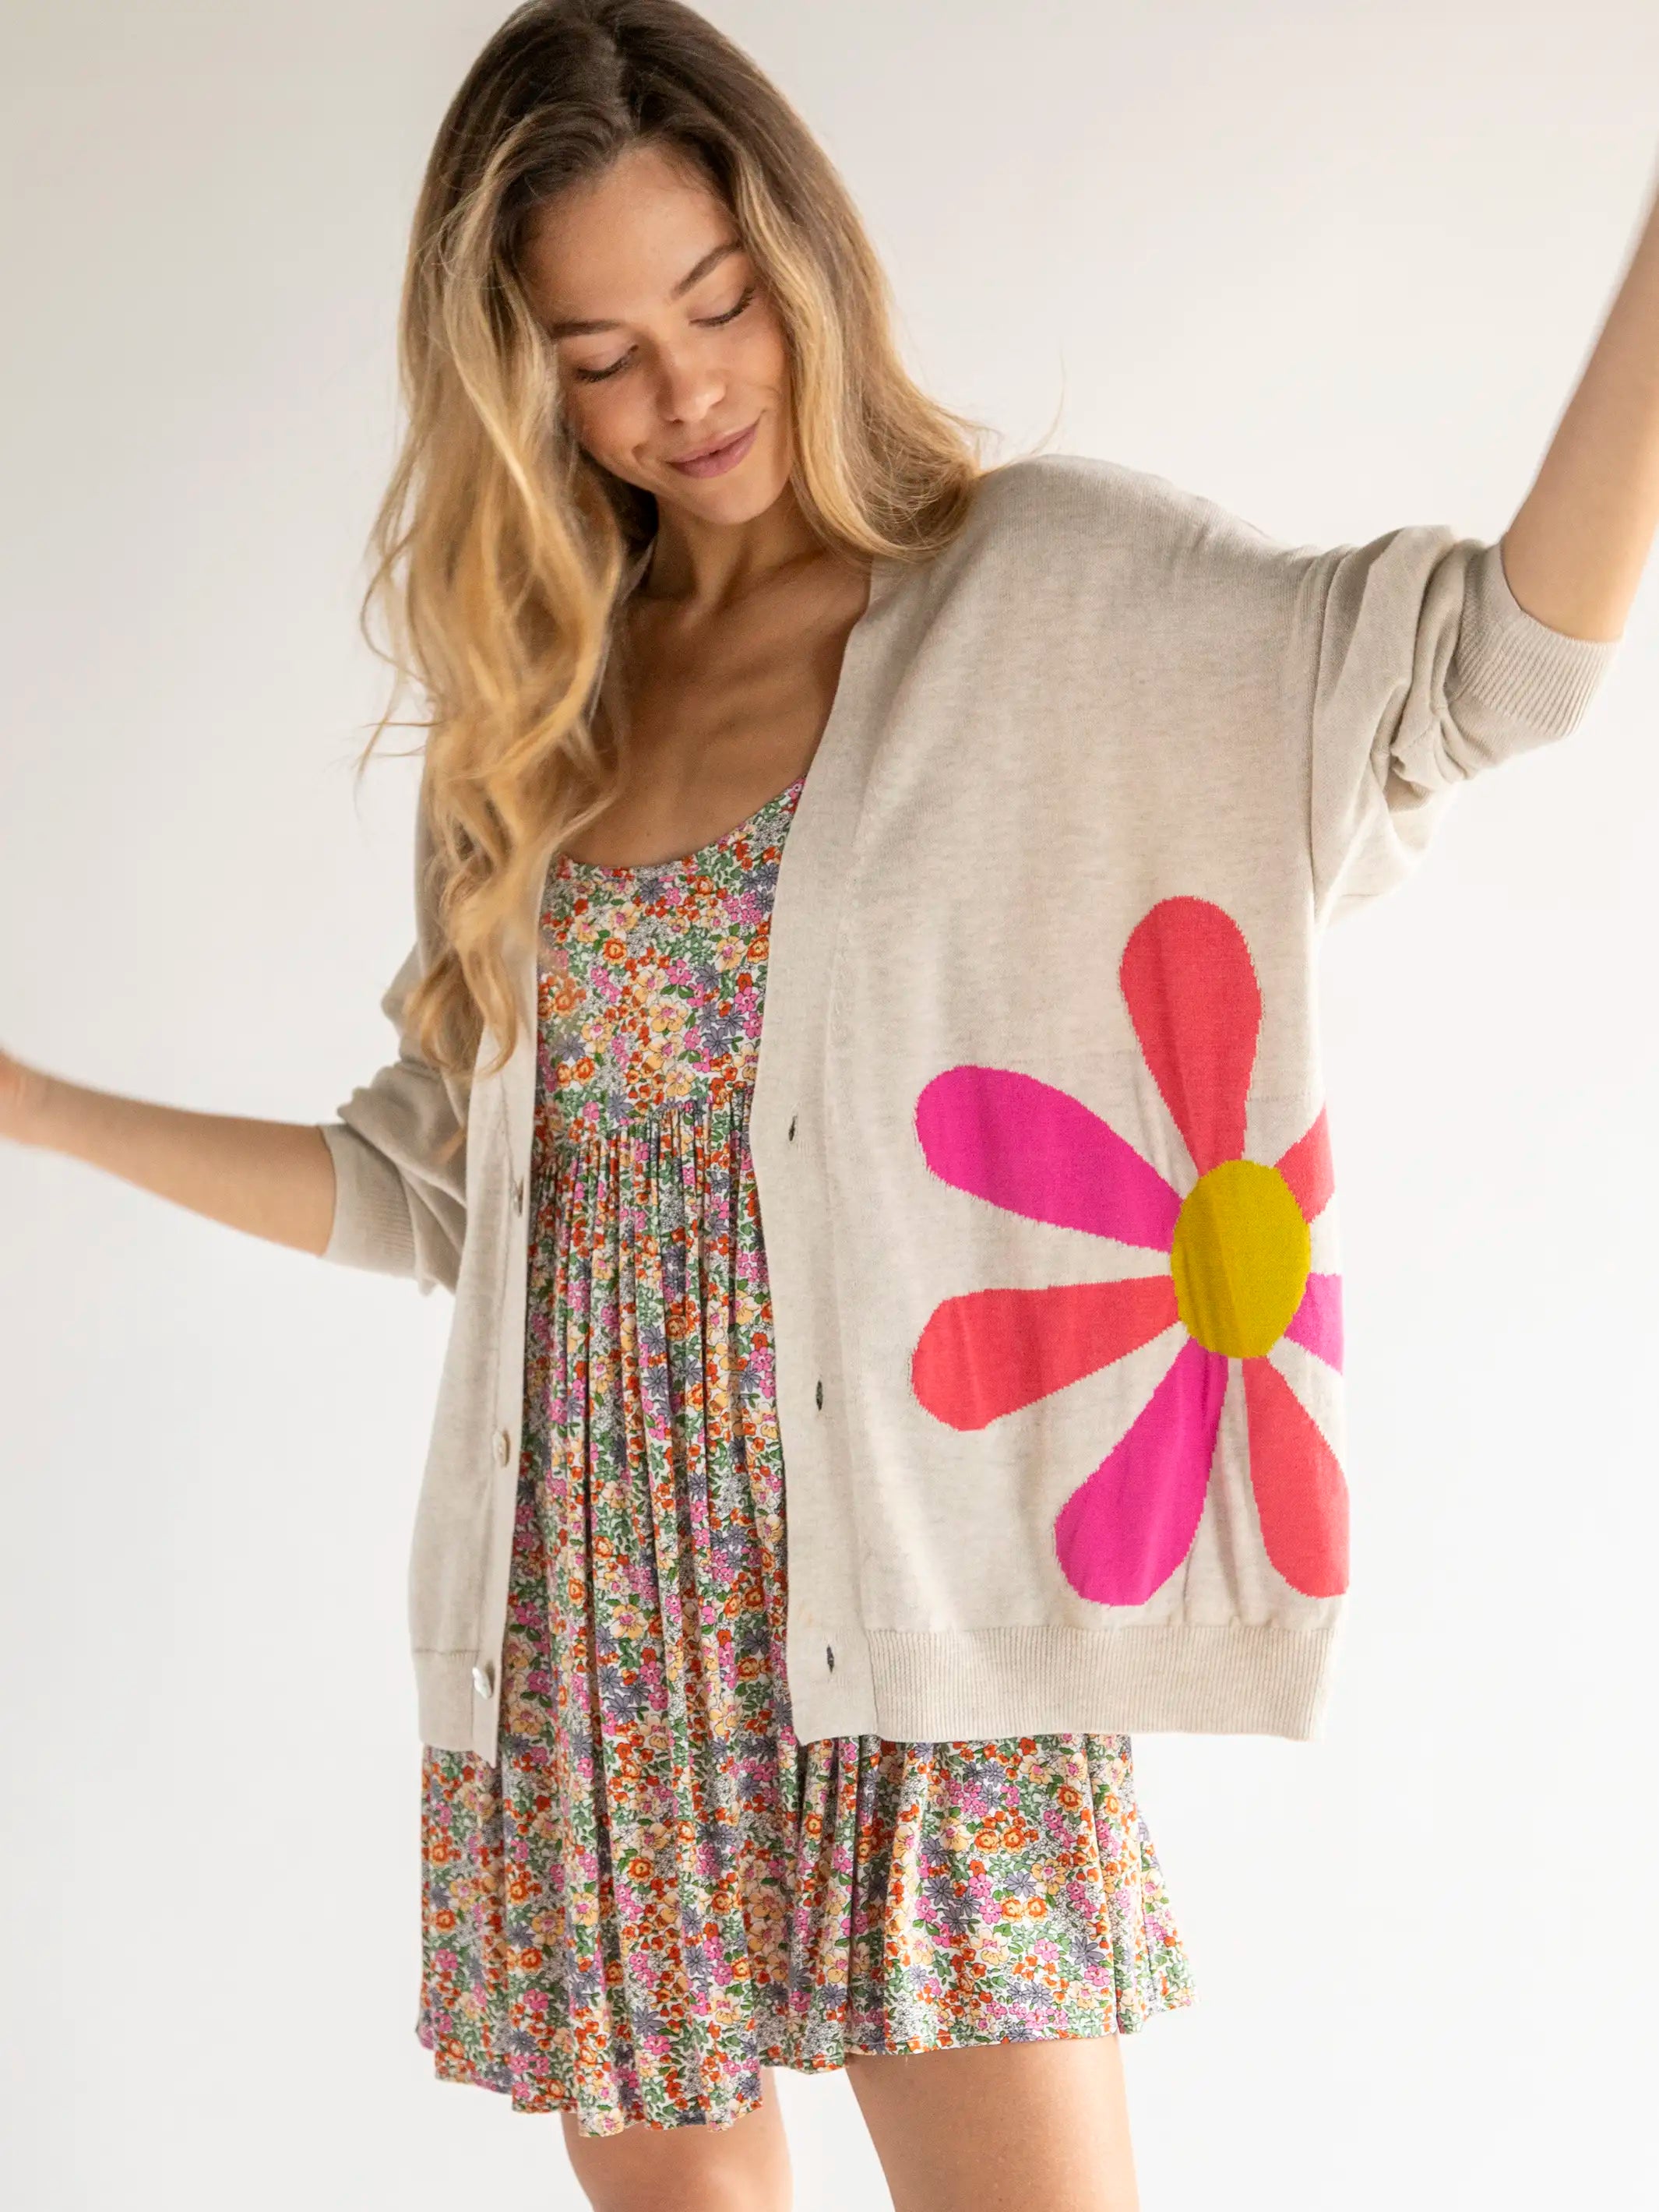 Live Happy Cardigan Sweater - Olive Daisy – Natural Life